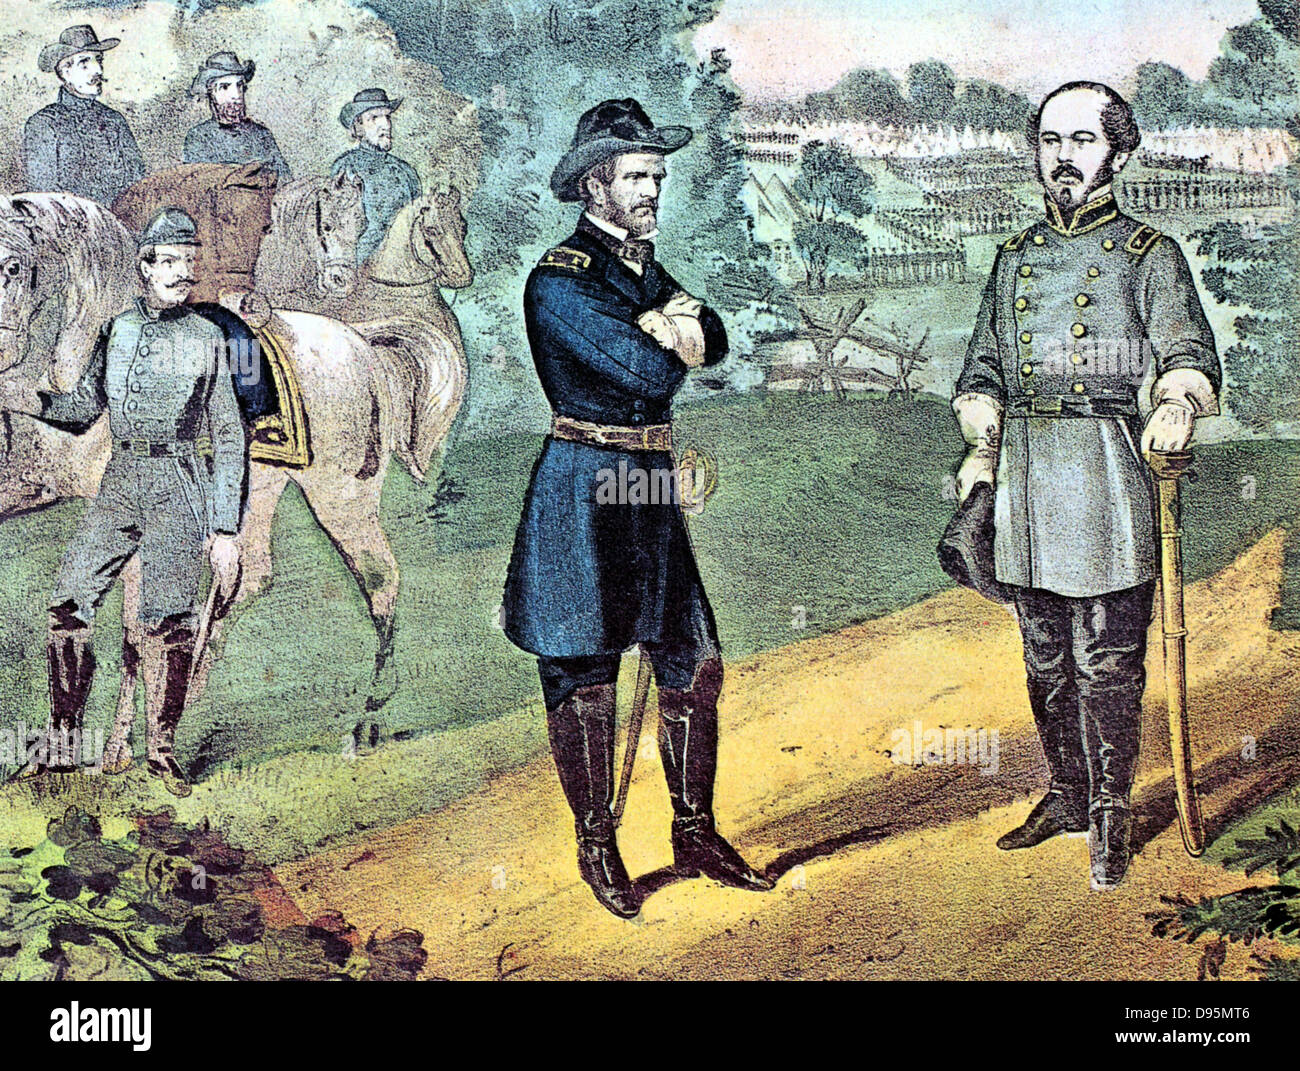 American Civil War 1861-1865: William Tecumseh Sherman (1820-1891) left, Unionist (northern) general, meeting General Joseph E Johnston to discuss terms of surrender of Confederate (southern) forces in North Carolina. After Currier & Ives lithograph. Stock Photo